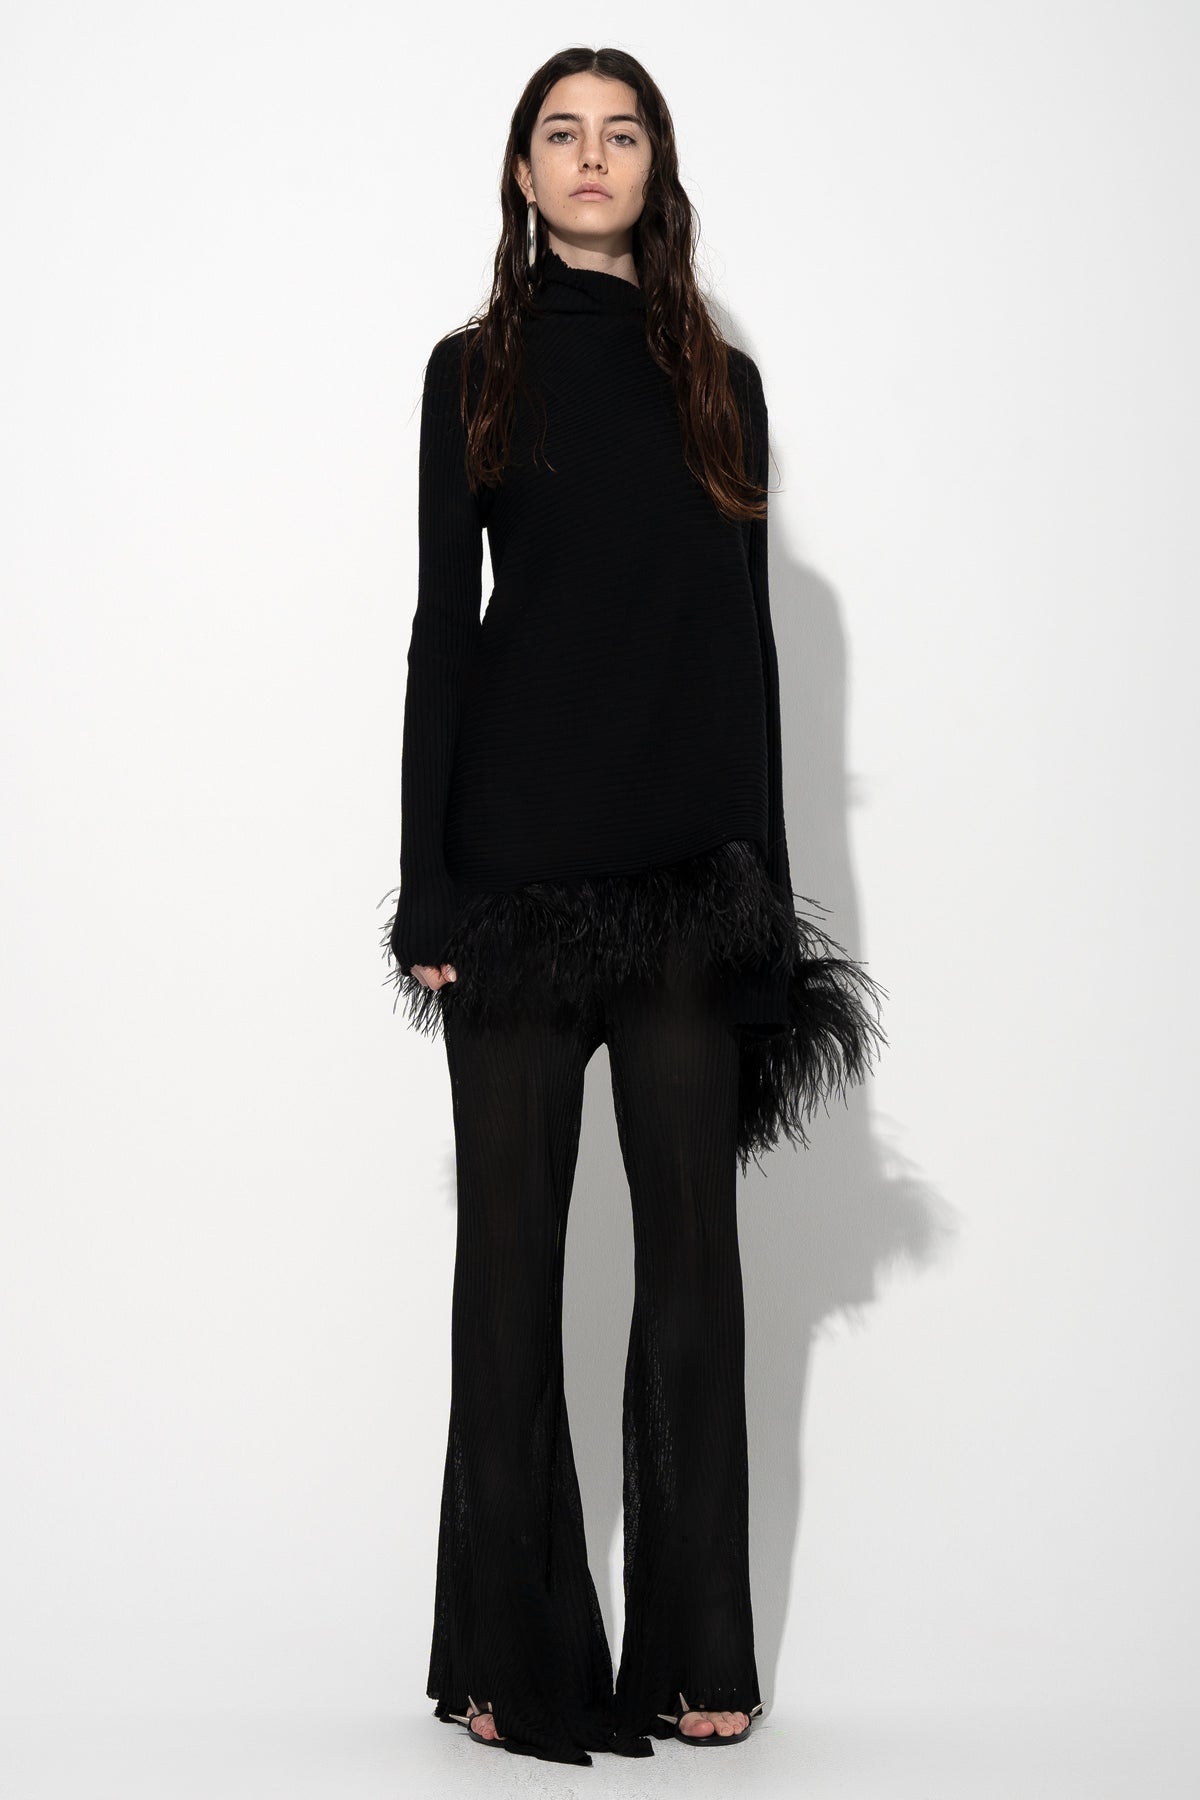 BLACK MERINO WOOL DRAPED JUMPER WITH FEATHERS marques almeida